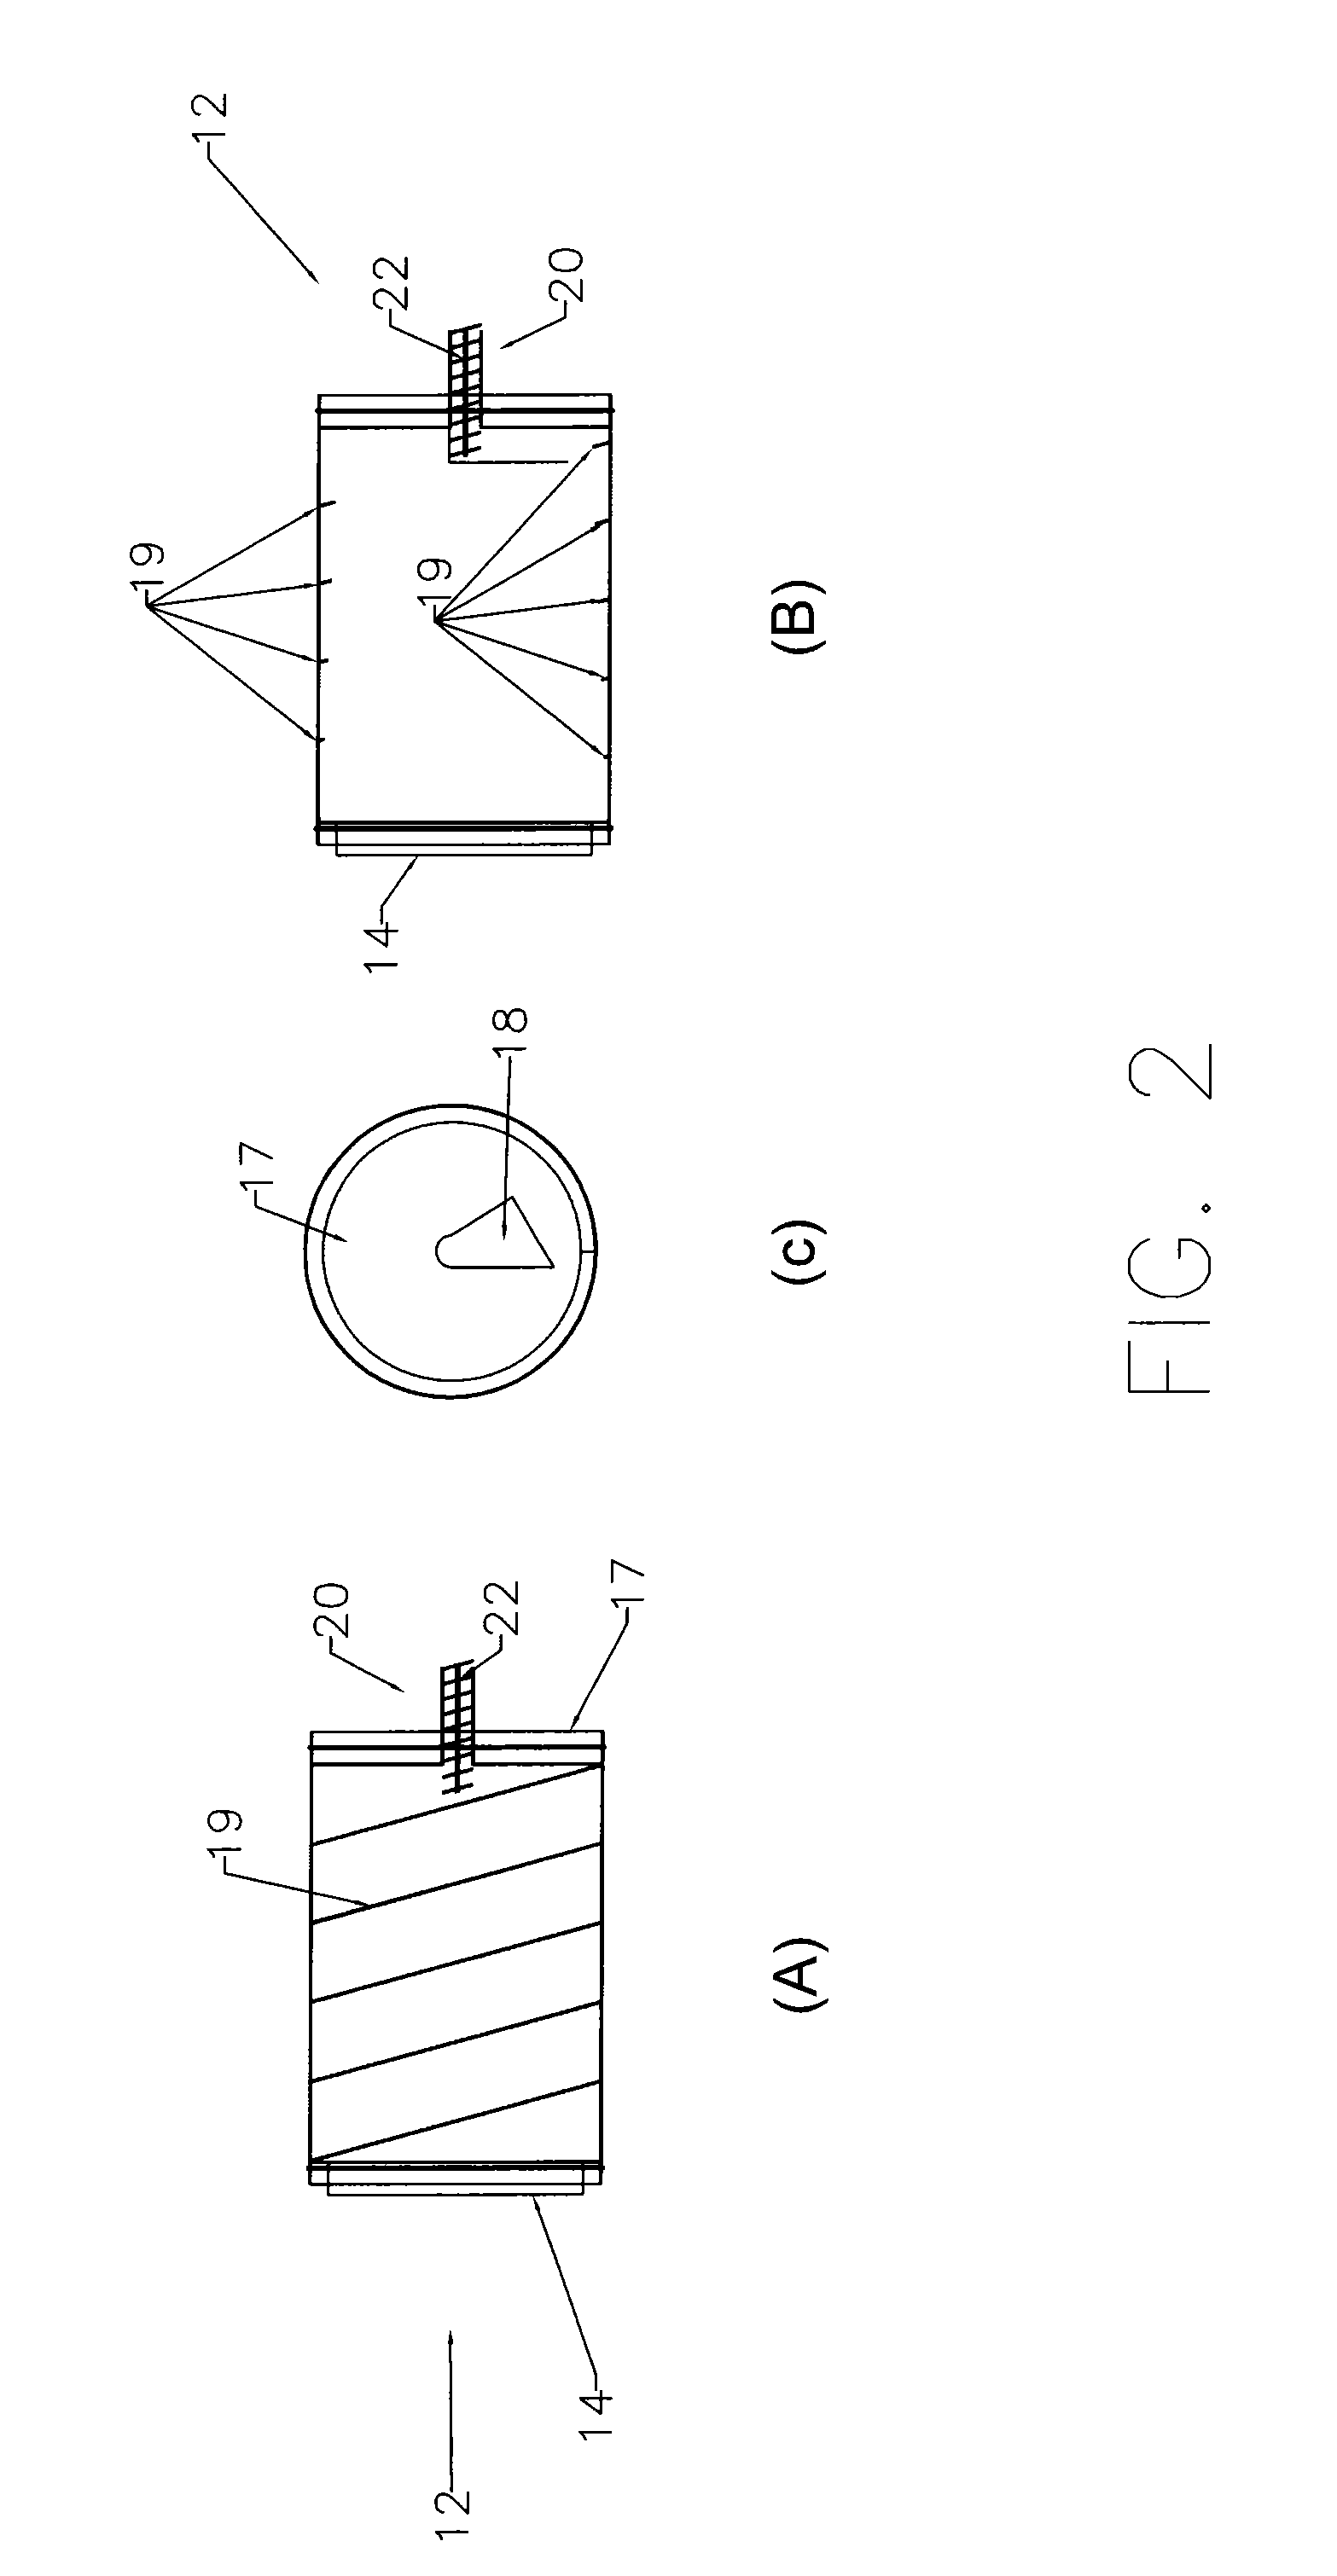 Hybrid system and process for converting whole tires and other solid carbon materials into reclaimable and reusable components